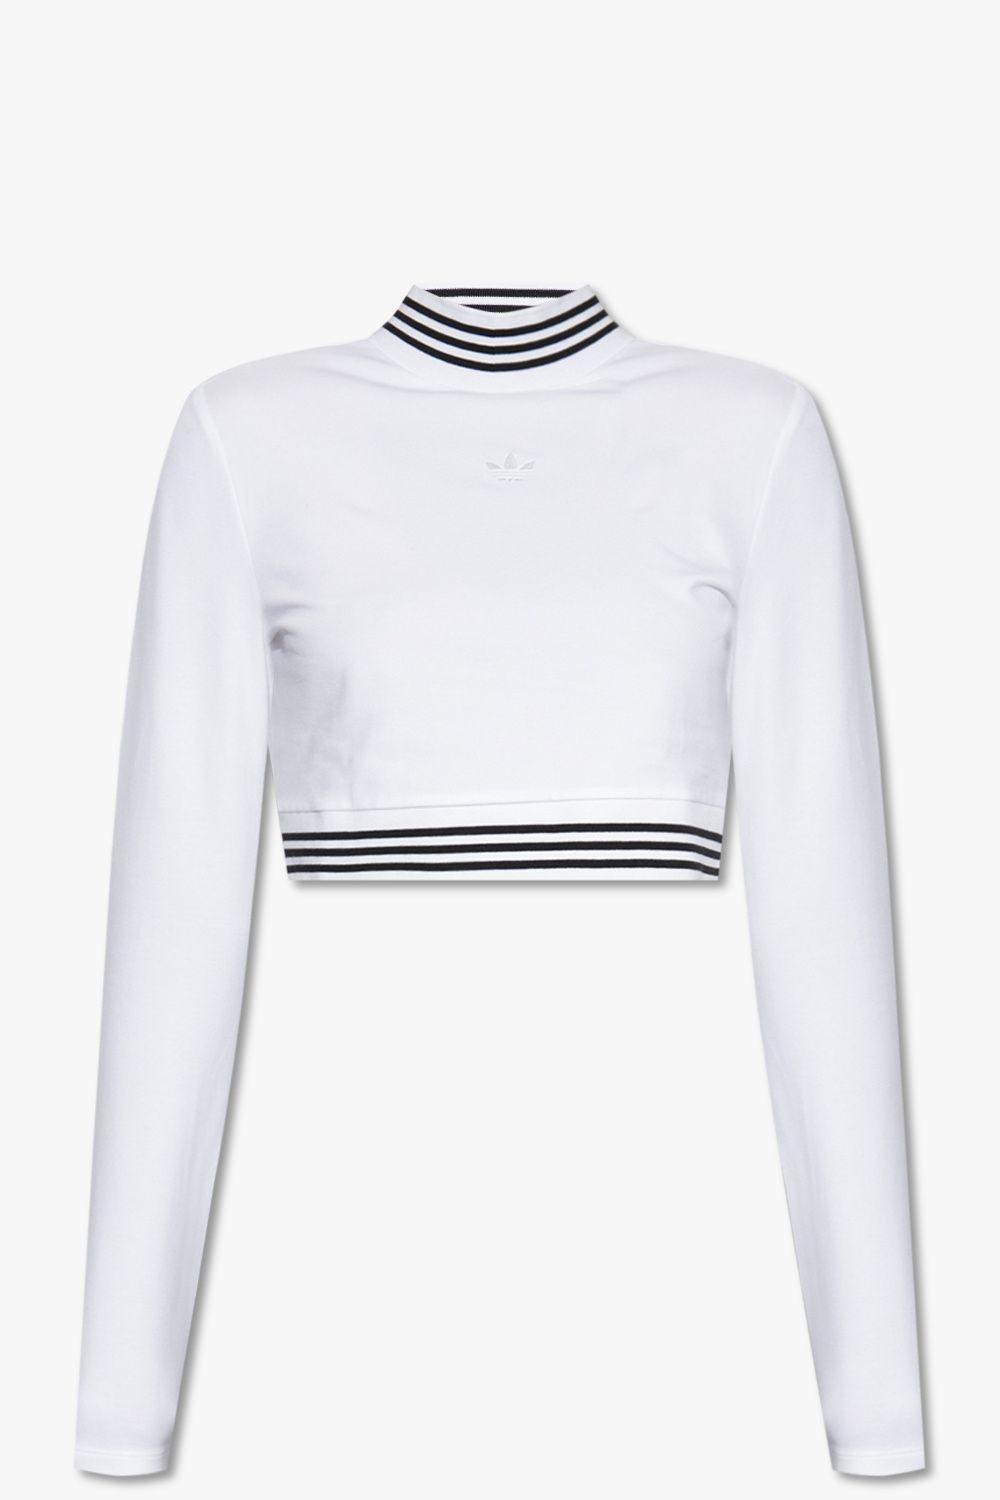 adidas Originals Cropped Top in White | Lyst